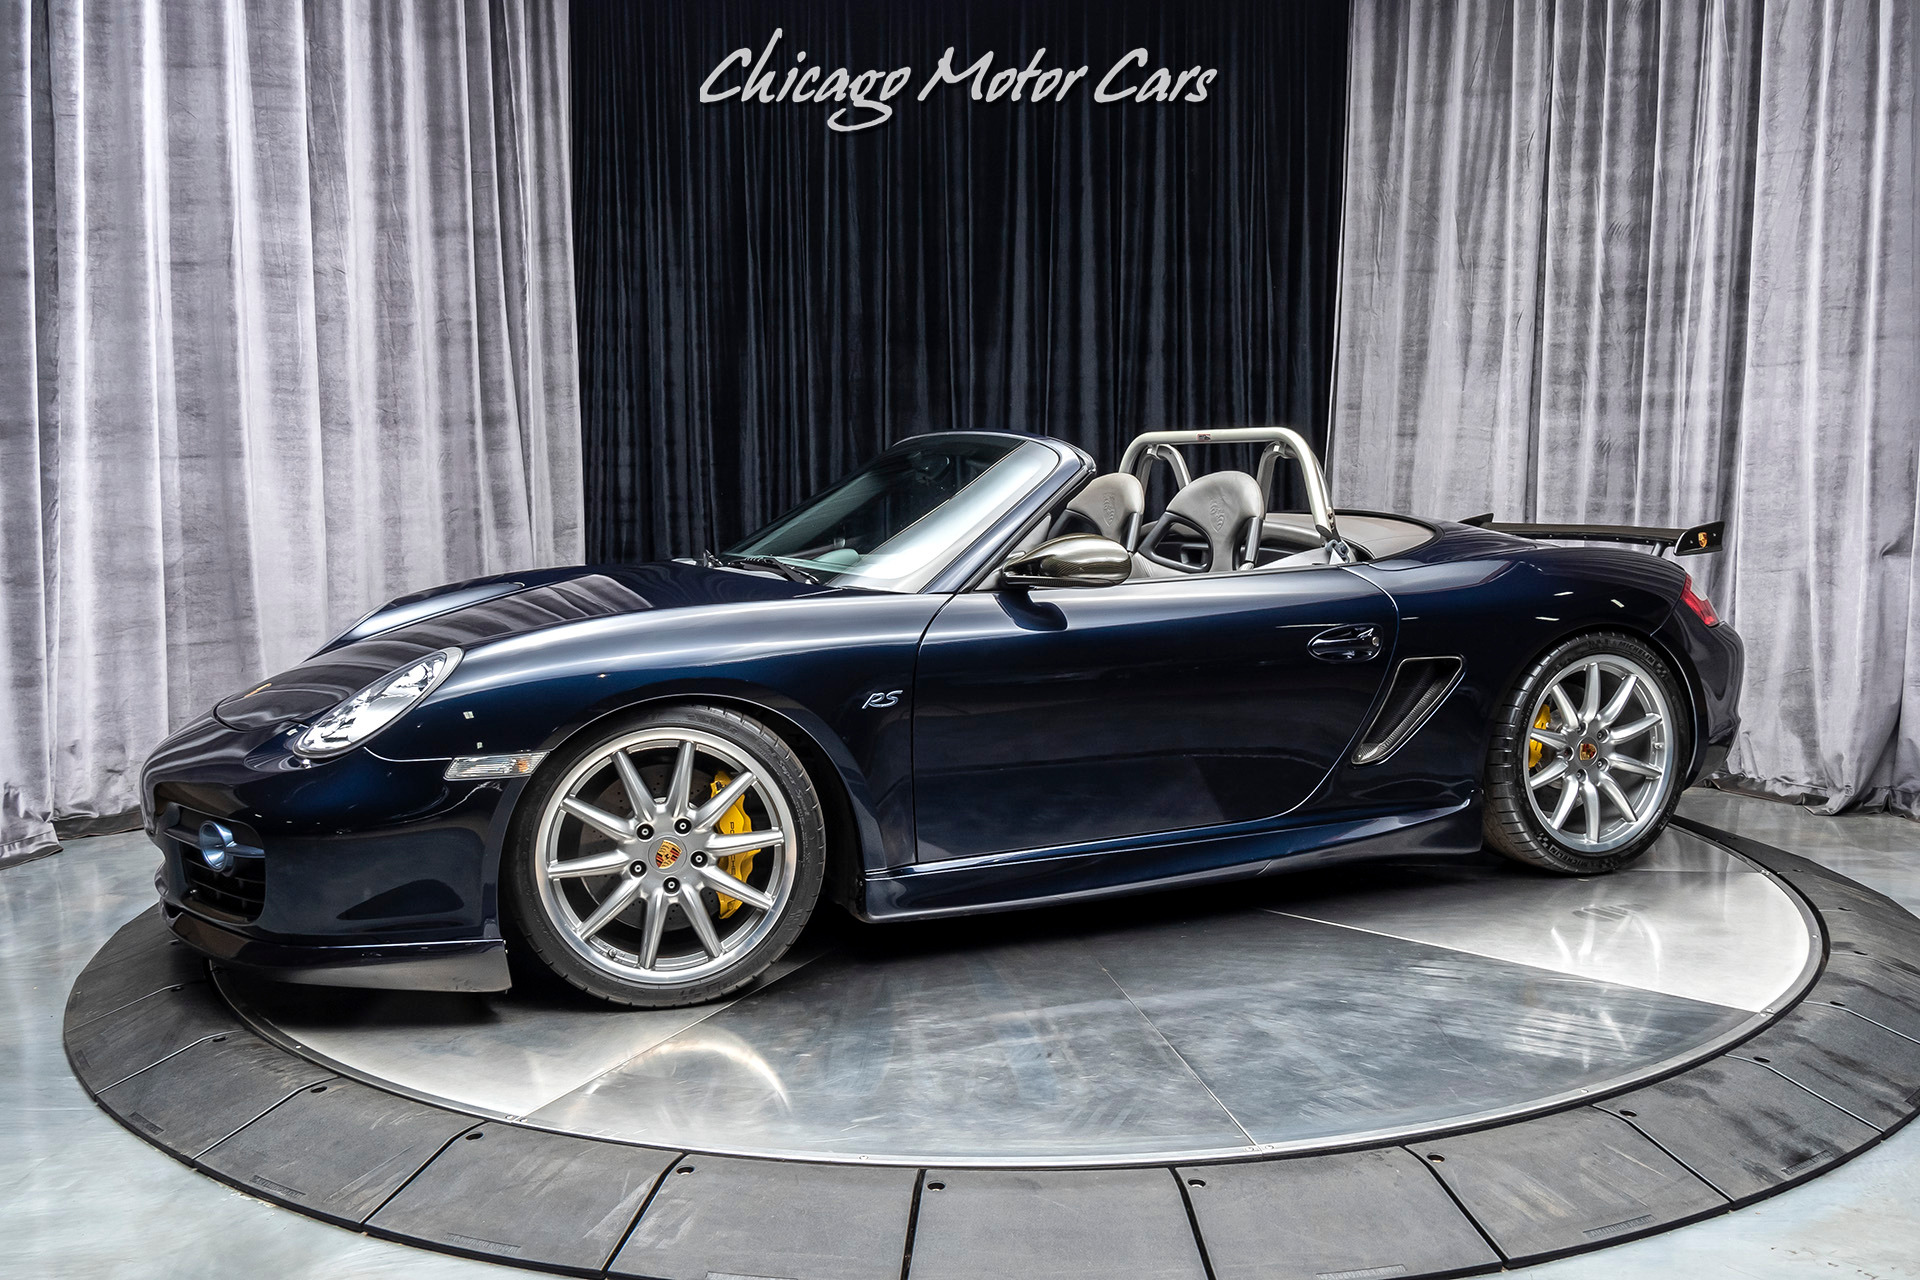 Used 2007 Porsche Boxster S Convertible Original MSRP $80k+ 26K IN  UPGRADES! For Sale (Special Pricing) | Chicago Motor Cars Stock #16229F